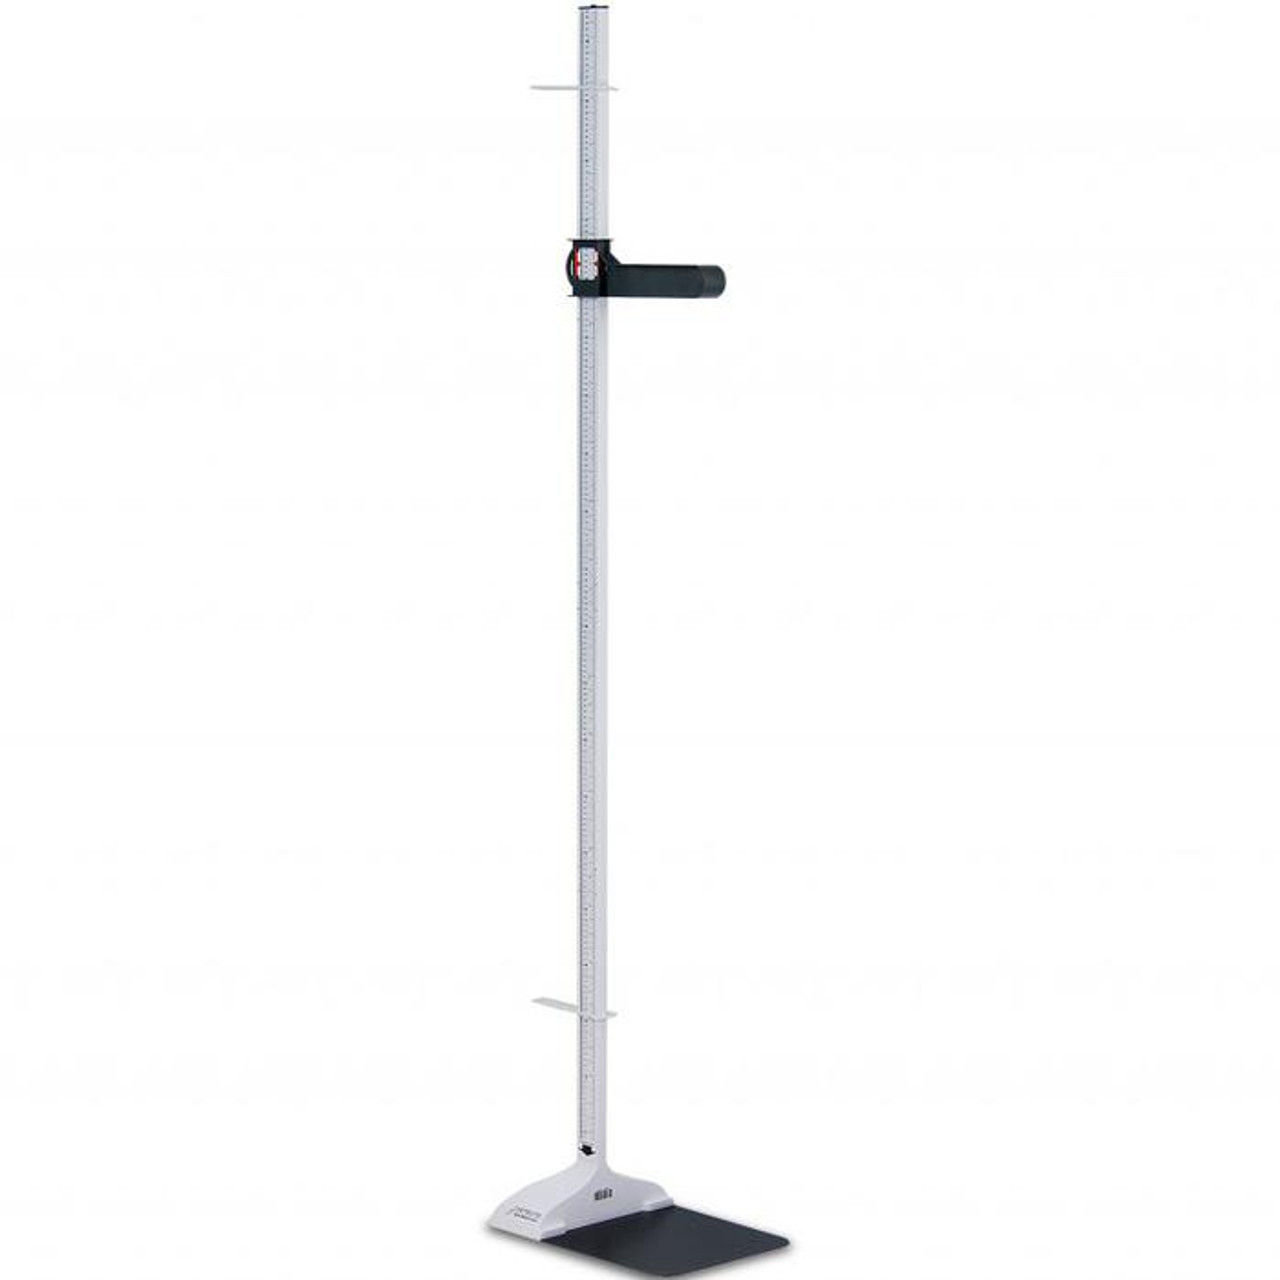 https://store.cevimed.com/images/stencil/1280x1280/products/123013/127420/Detecto_Free-Standing_Portable_Mechanical_Height_Rod__01296__74759.1633715563.jpg?c=1